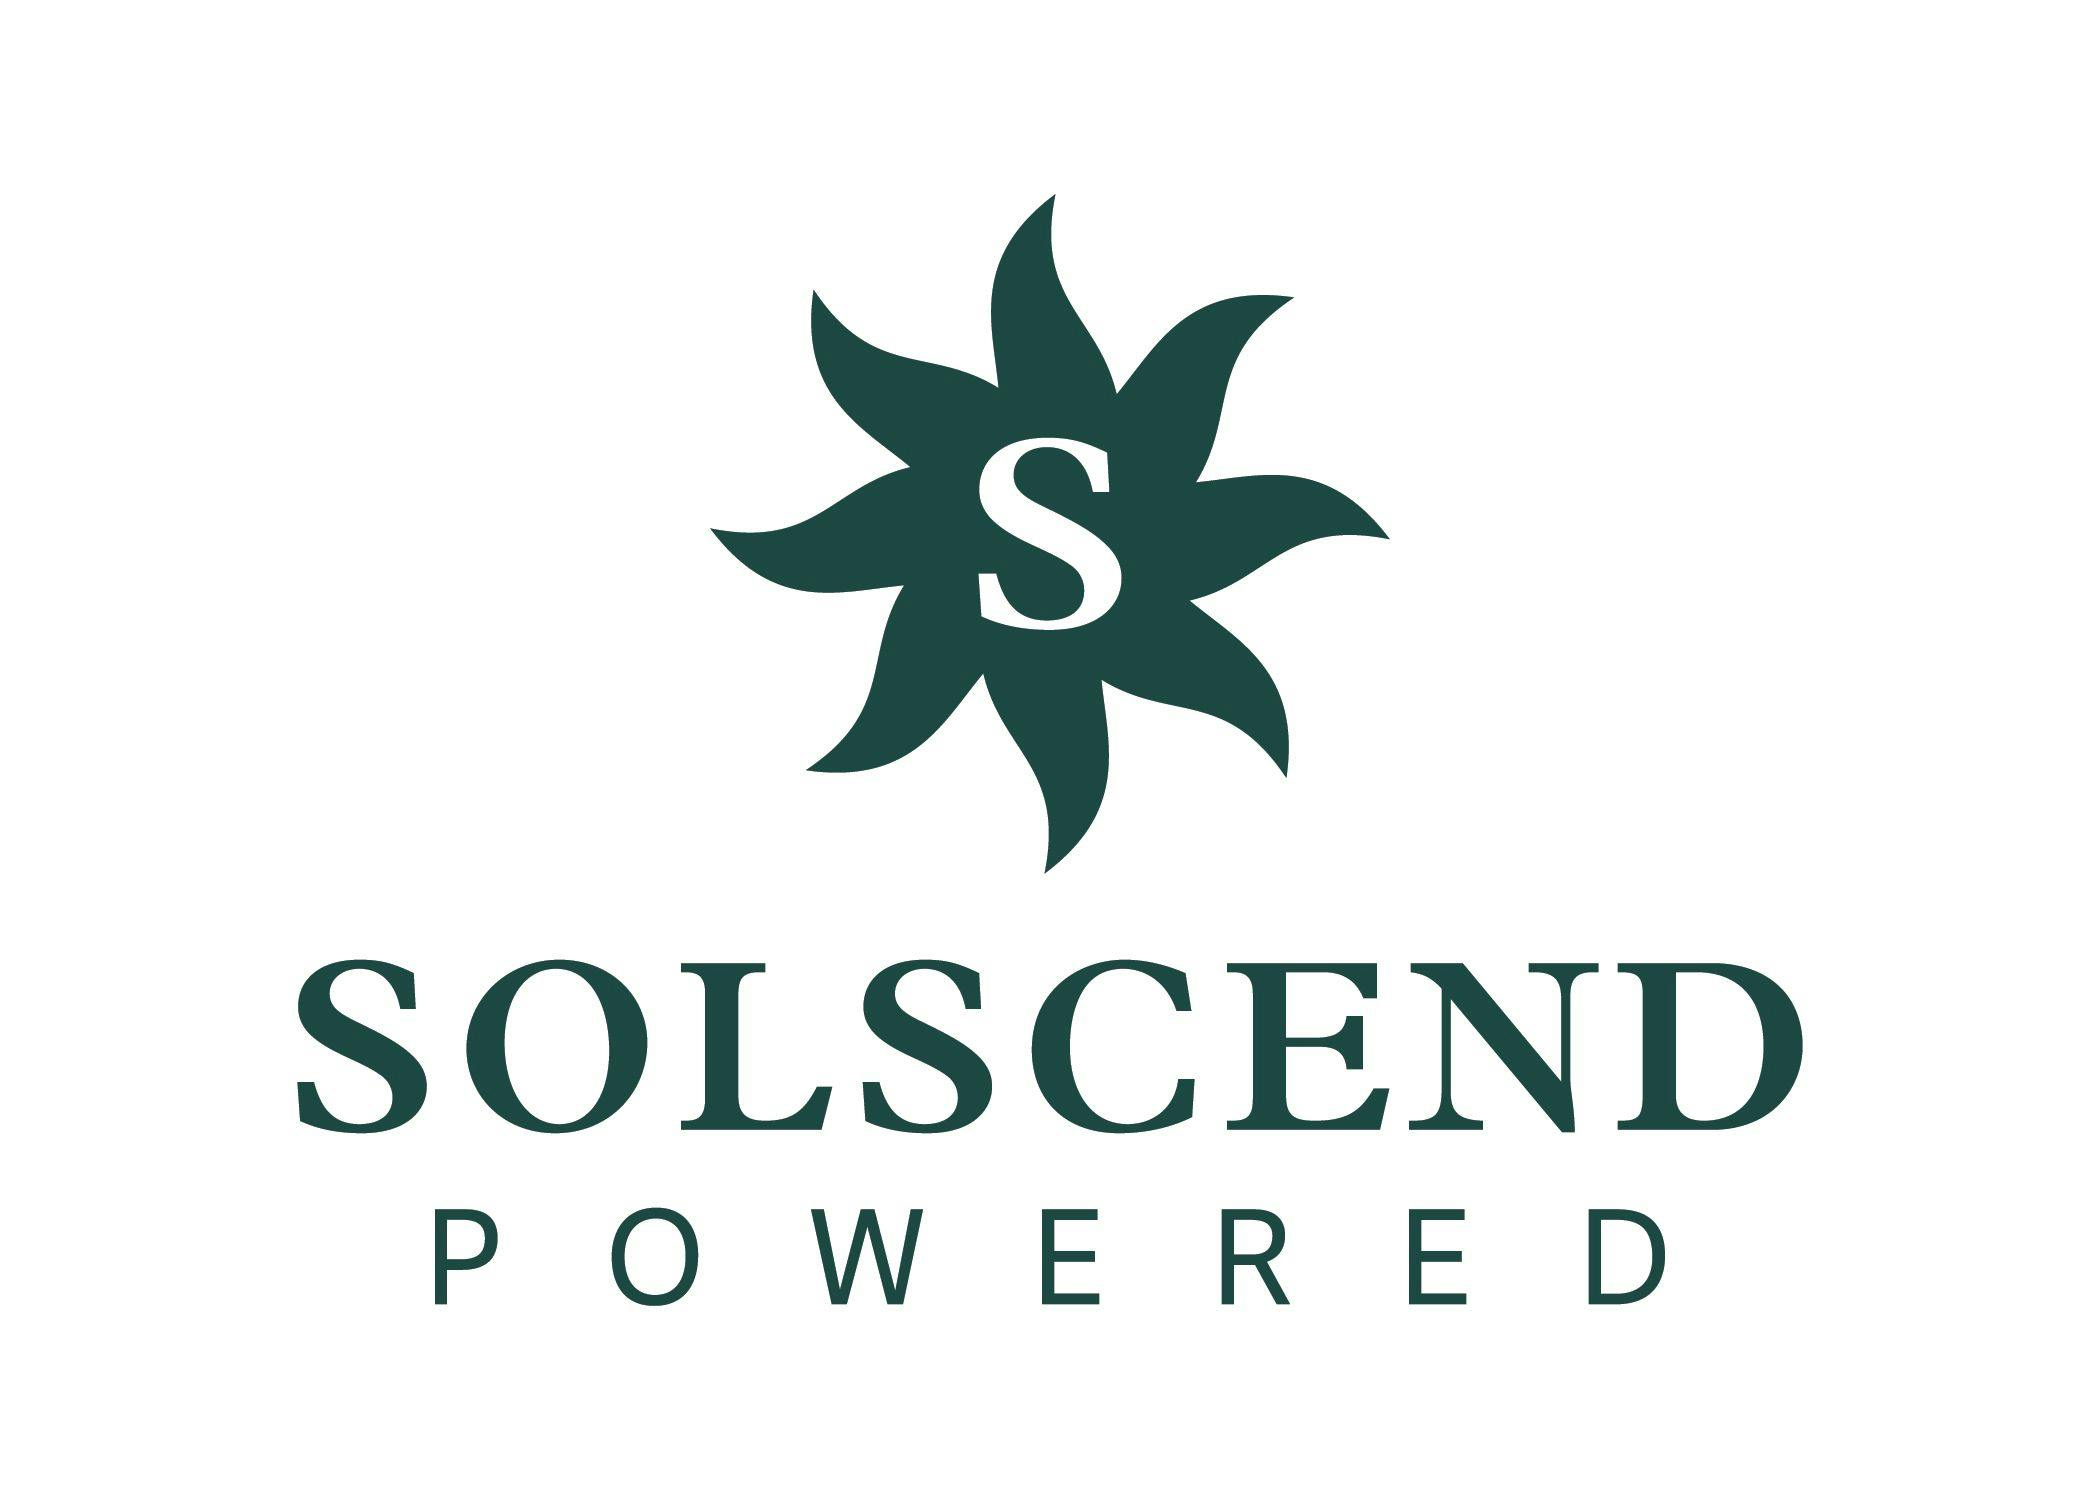 a dark green graphic logo with an "S" inside a sun which reads Solscend Powered.